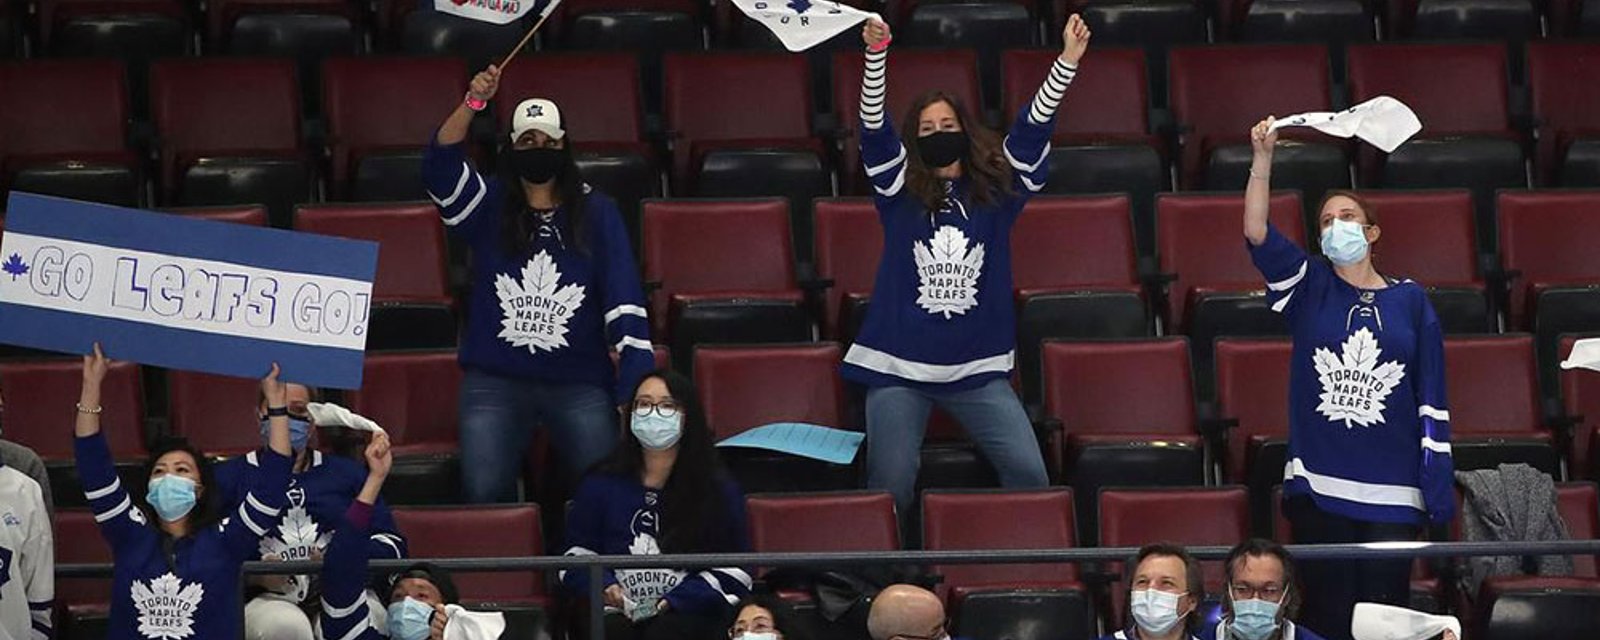 Ontario government changes regulations, allows Leafs to have fans for game against Habs